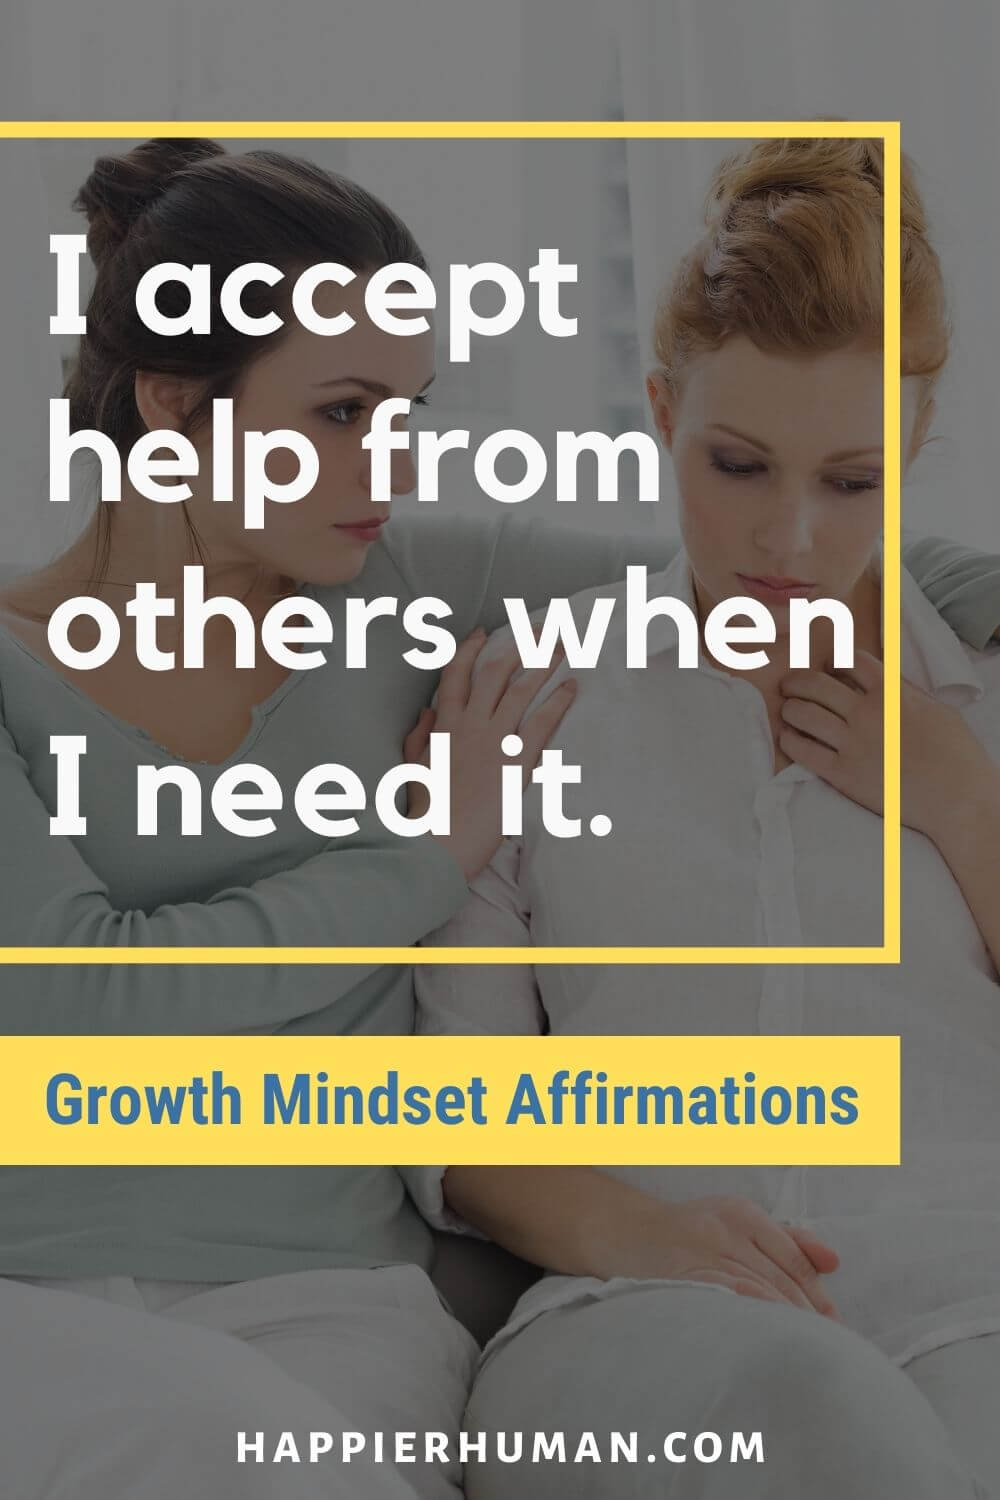 Growth Mindset Affirmations - I accept help from others when I need it. | growth mindset affirmations for students | growth mindset affirmations printable | growth mindset affirmations for adults